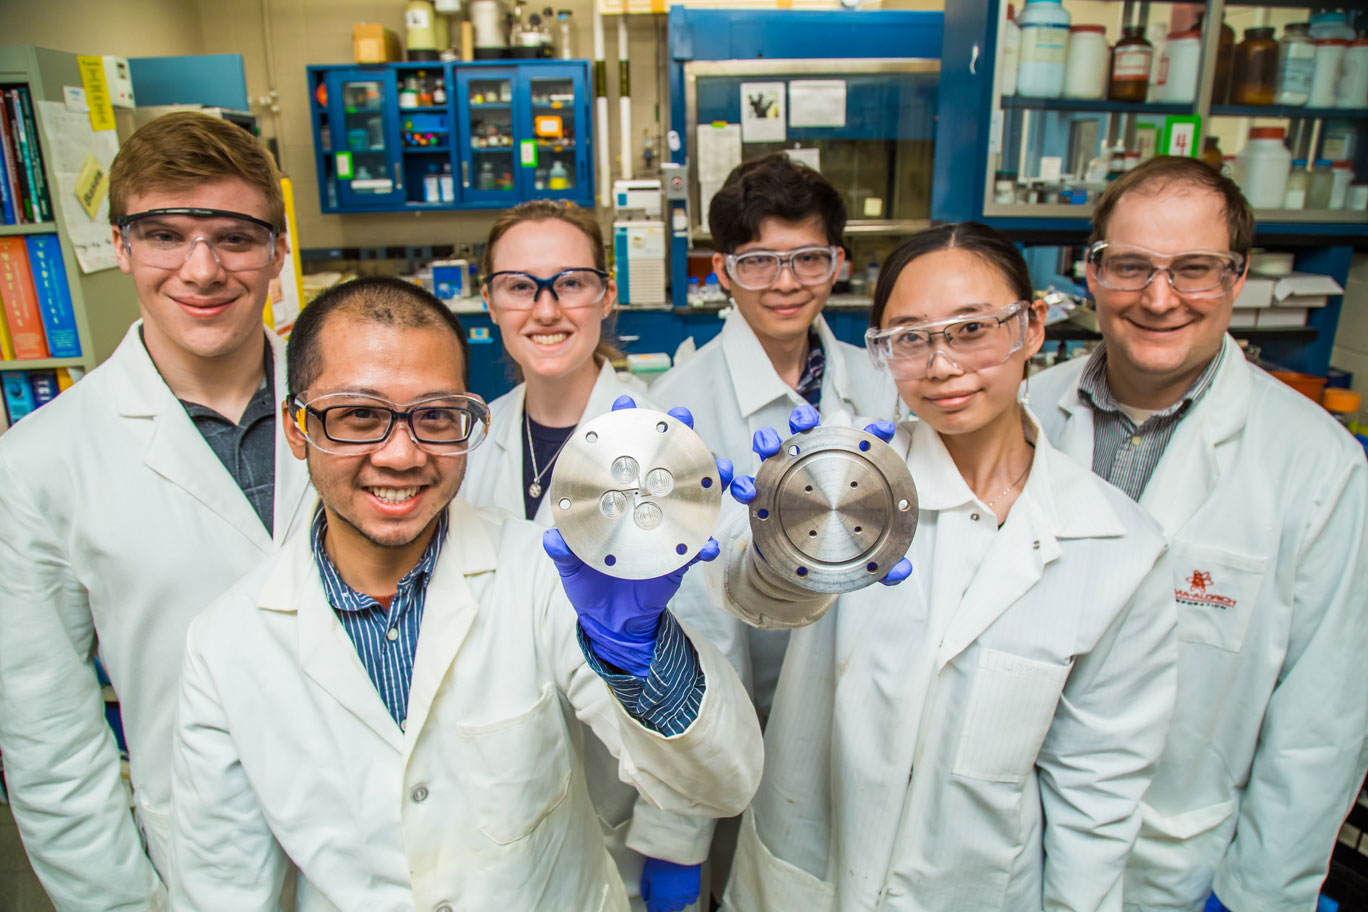  Researchers Prud'homme's lab display equipment used to encapsulate medicines for use in combating childhood diseases. From left, the team includes: Kurt Ristroph, Ph.D. student; Jack Lu, a 2017 graduate alumnus; Ellen Dobrijevic, a 2017 undergraduate alumna; and postdoctoral researchers Jie Feng, Joanna Zhang and Simon McManus.  Photo by David Kelly Crow